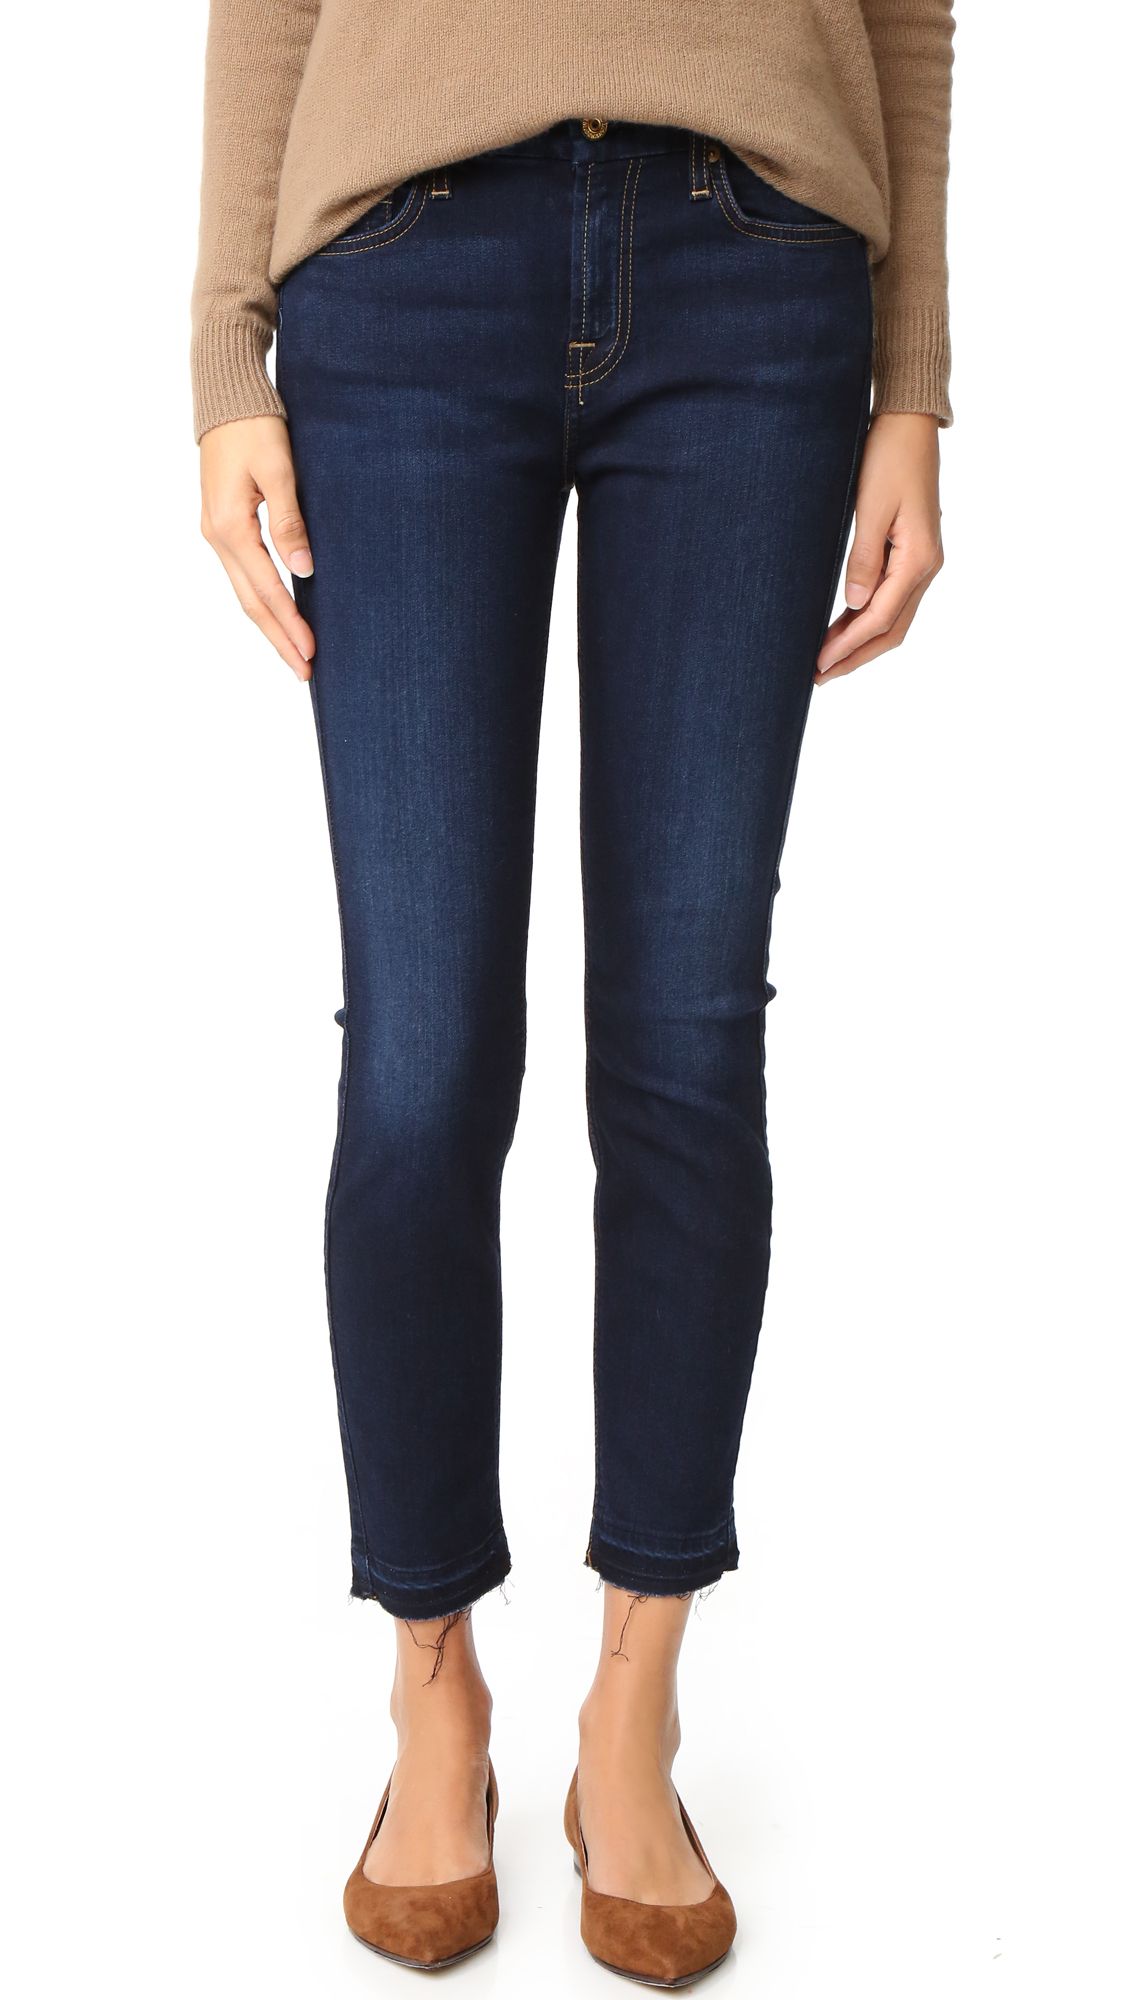 7 For All Mankind The B(Air) Ankle Skinny Jeans - Tranquil Blue | Shopbop